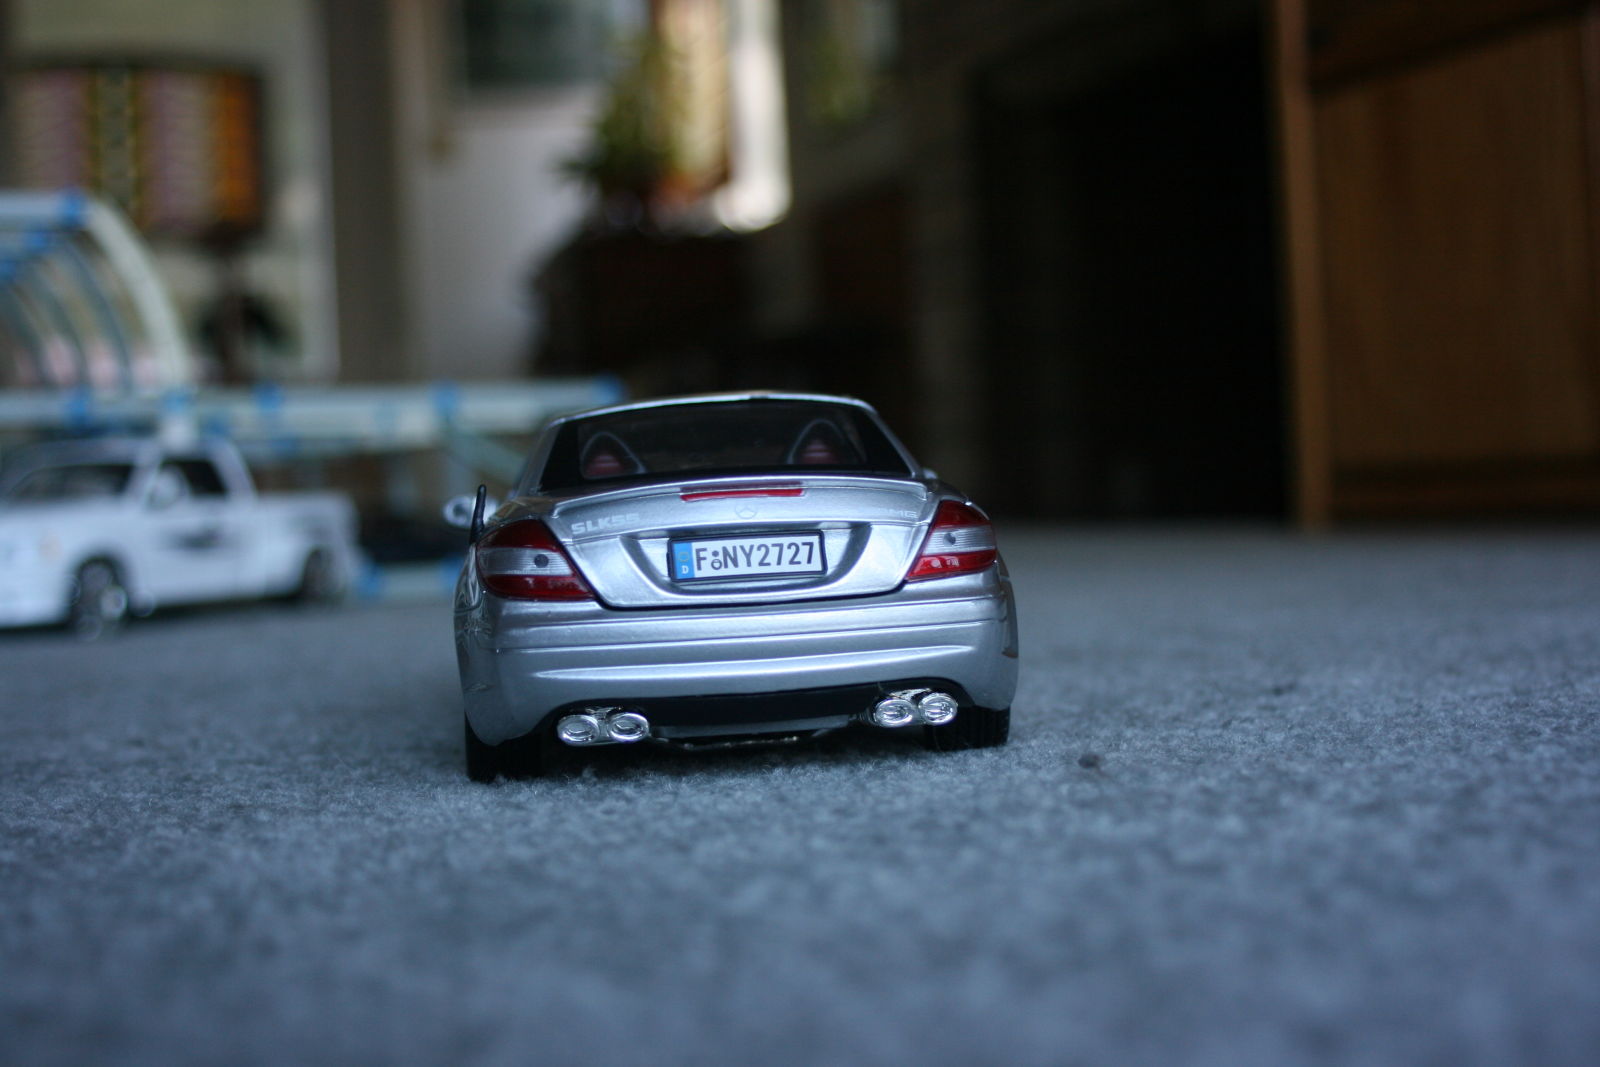 Illustration for article titled Live and Let Diecast: Some 1:18 scale cars